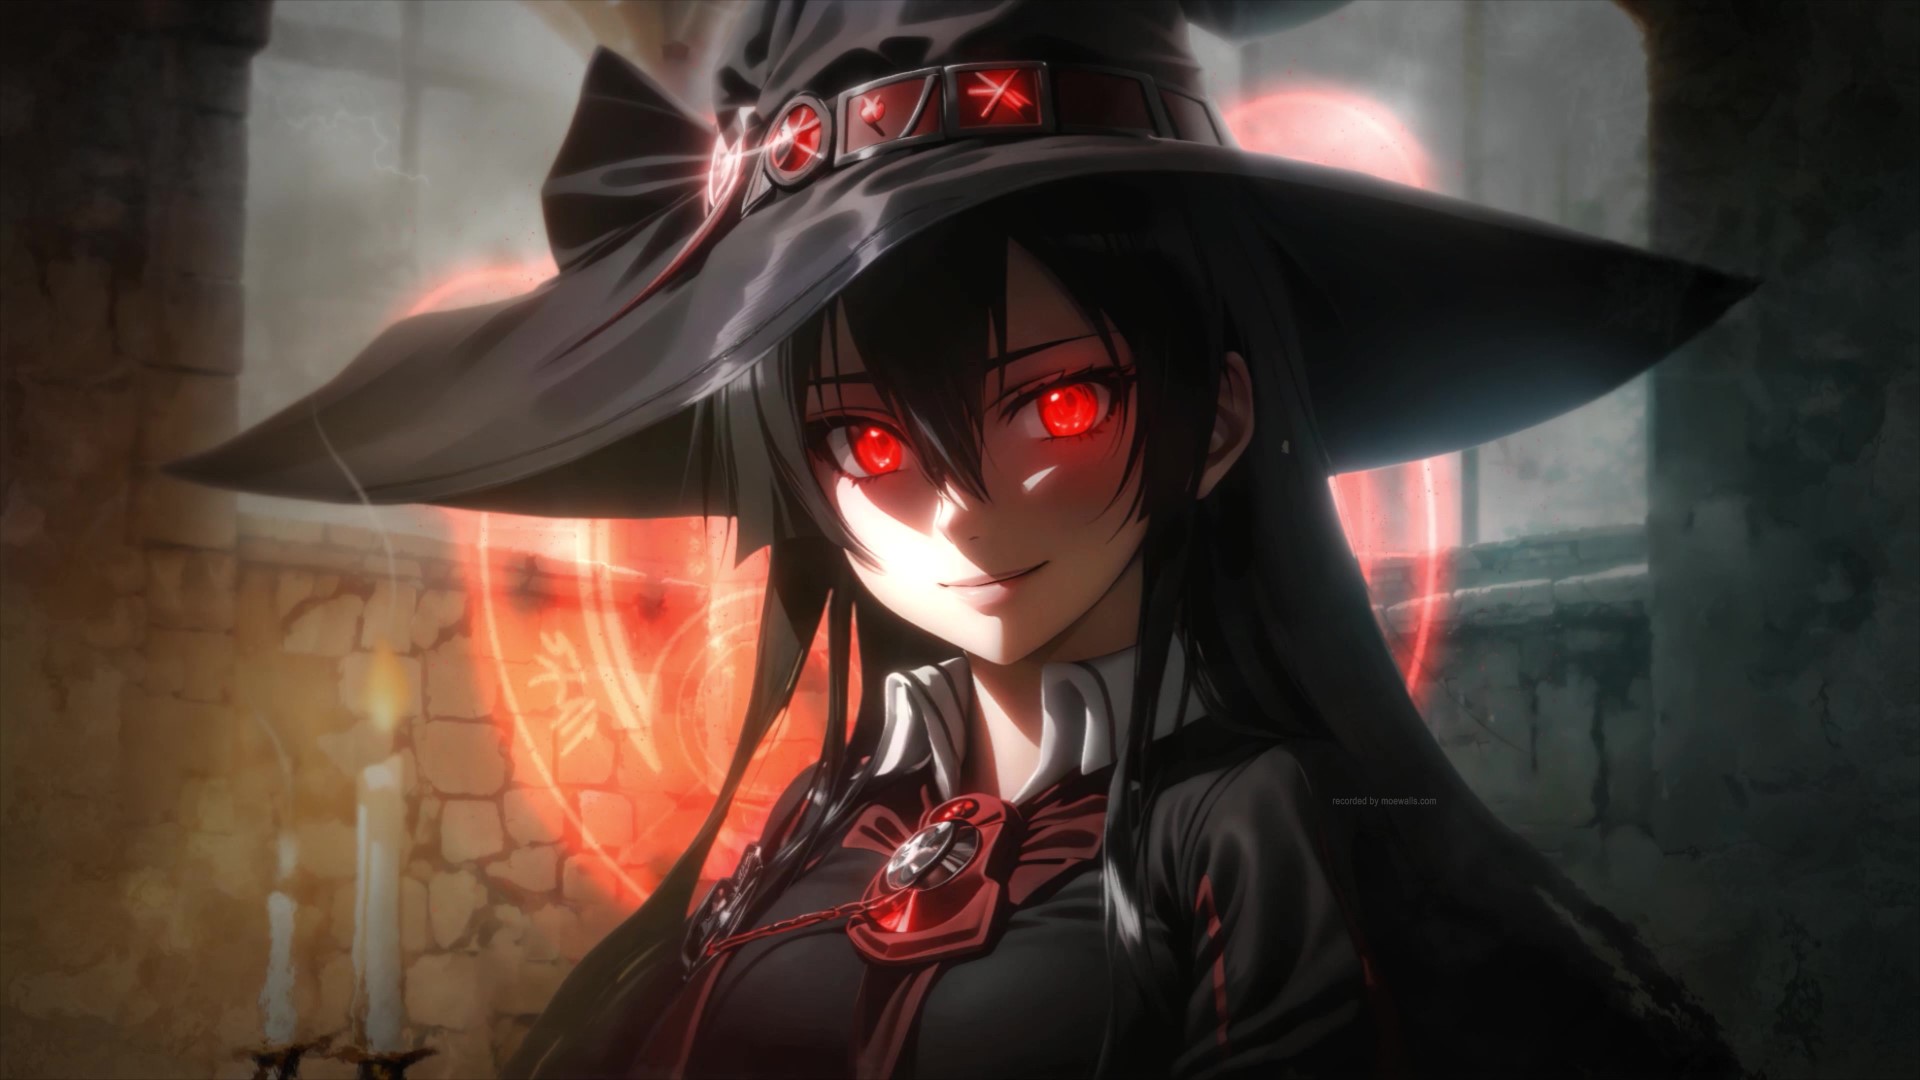 Witch Anime Girl